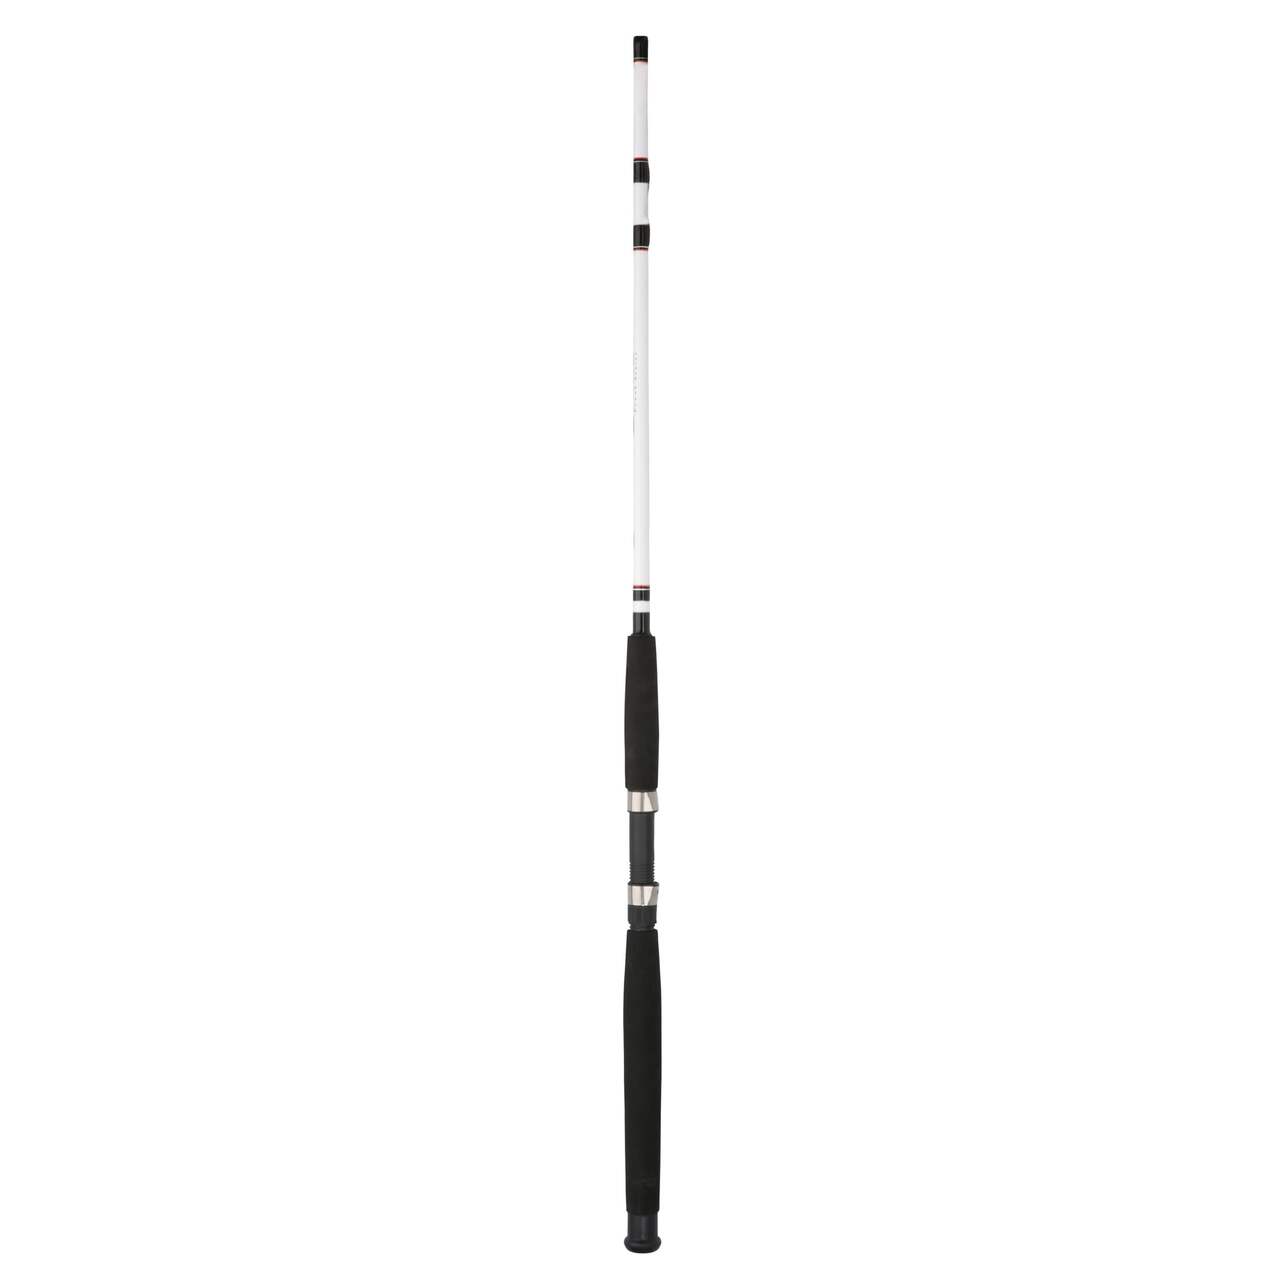 Berkley Big Game Spinning Fishing Rods, Collapsible/Foldable, Medium-Heavy,  8.3-ft, 2-pc